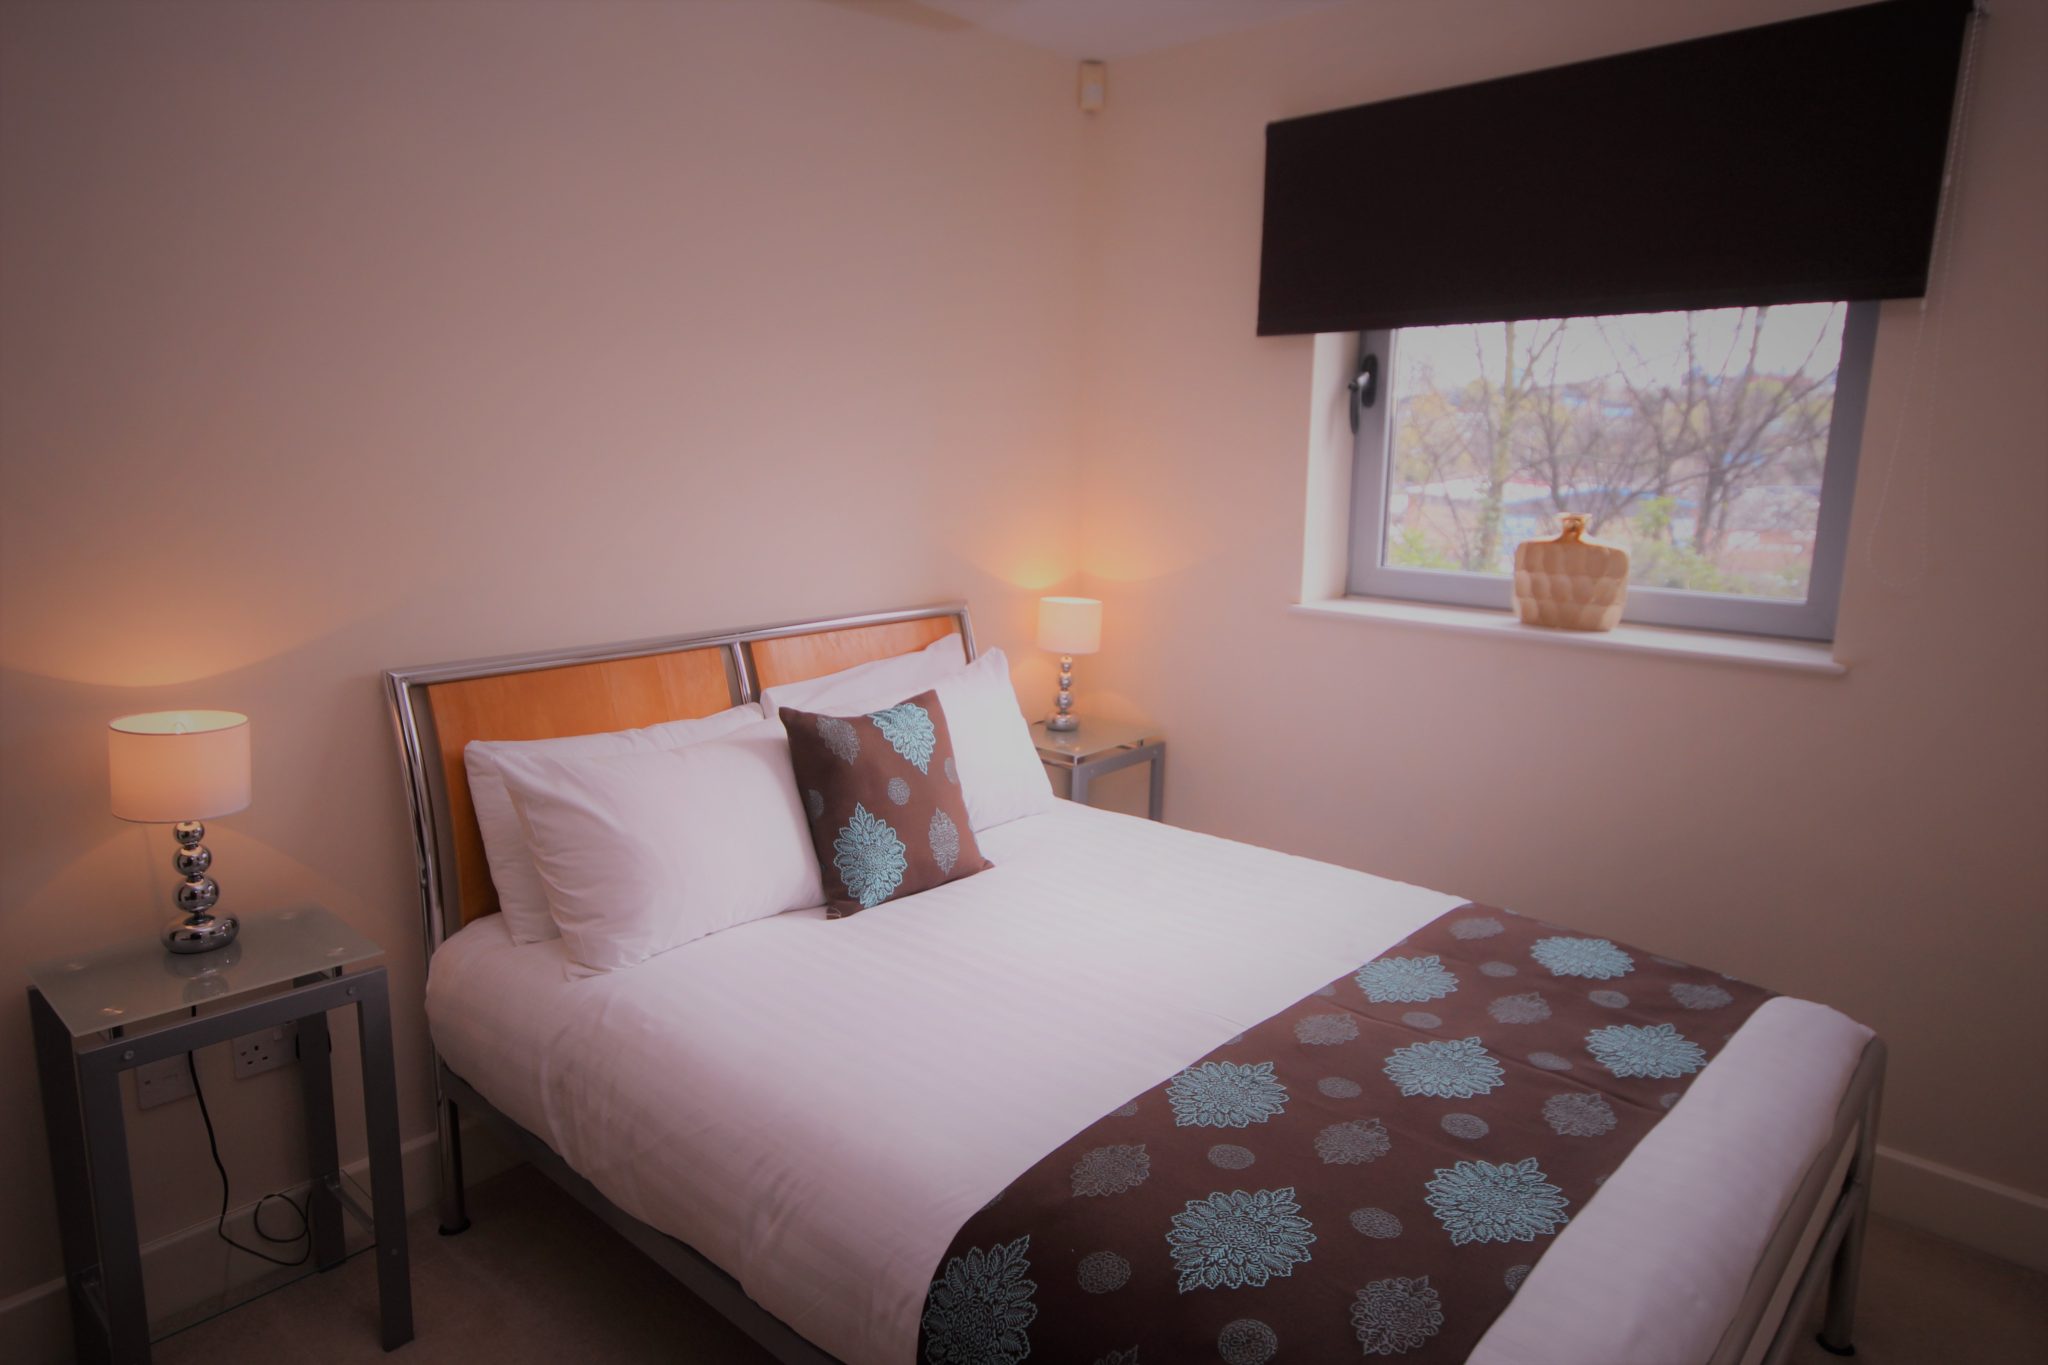 Modern-Newcastle Short-Stay-Apartments-available-from-today!-Book-Central-Newcastle-Accommodation-+-Wifi-+-Balcony,-incl-All-Bills-&-Fees!-Call:-02086913920-|-Urban-Stay